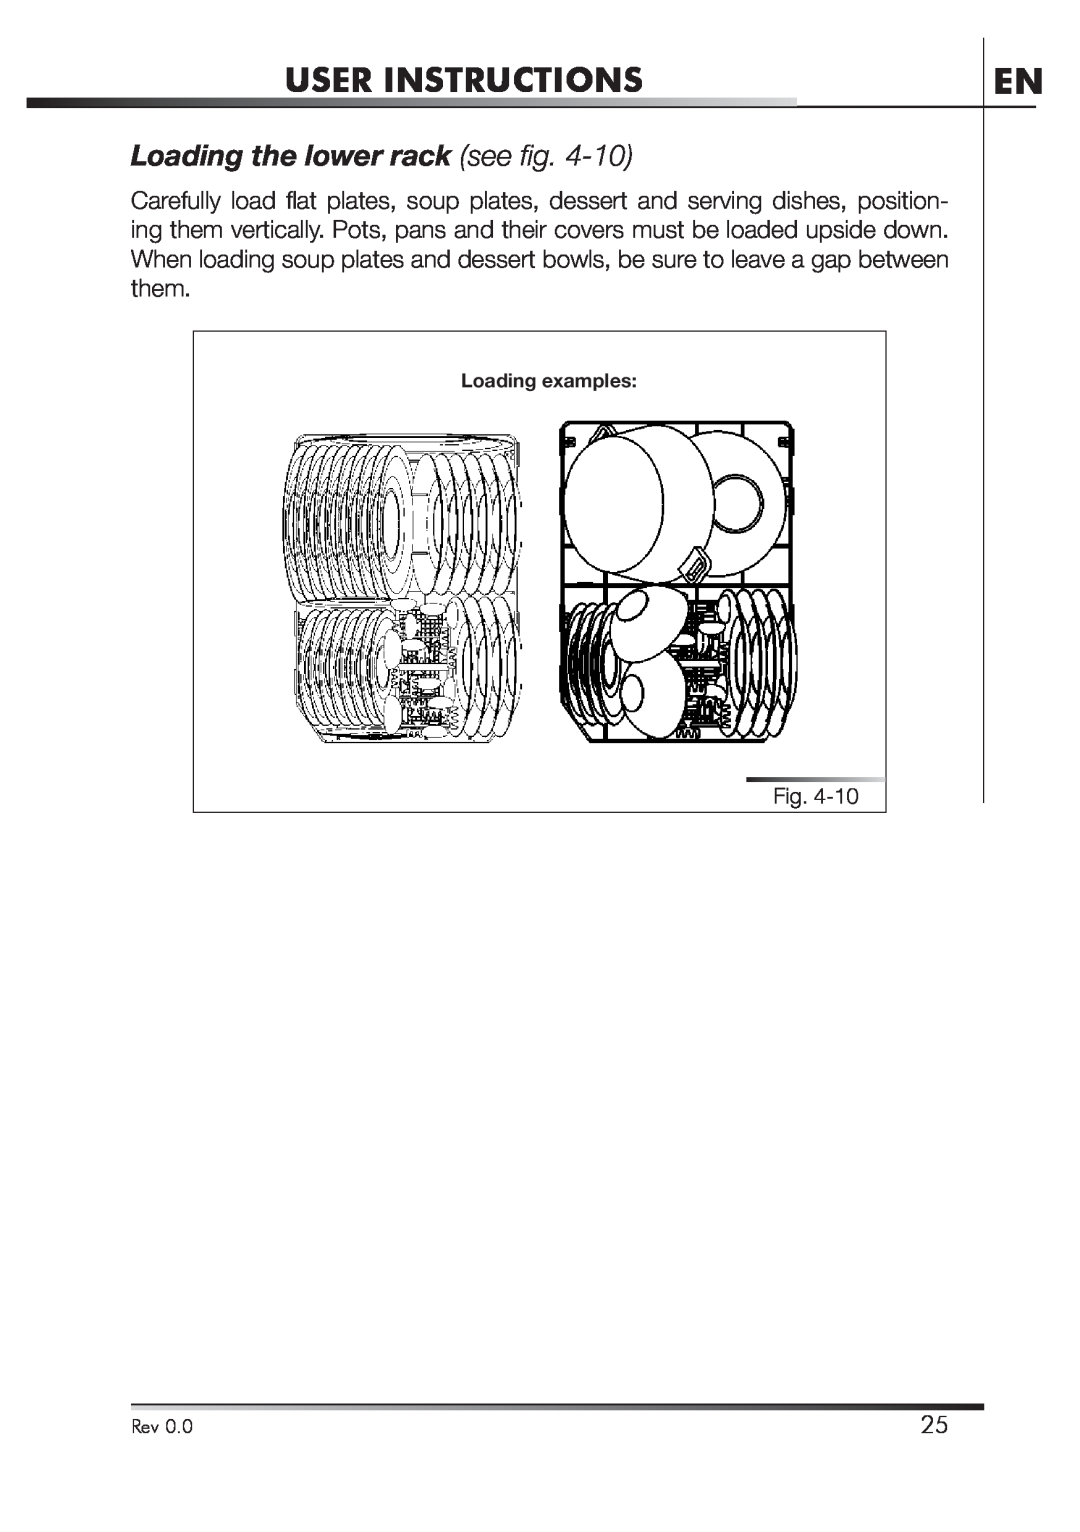 Smeg STA4645 instruction manual Loading the lower rack see ﬁ g, User Instructions, Esempi di caricamento, Loading examples 